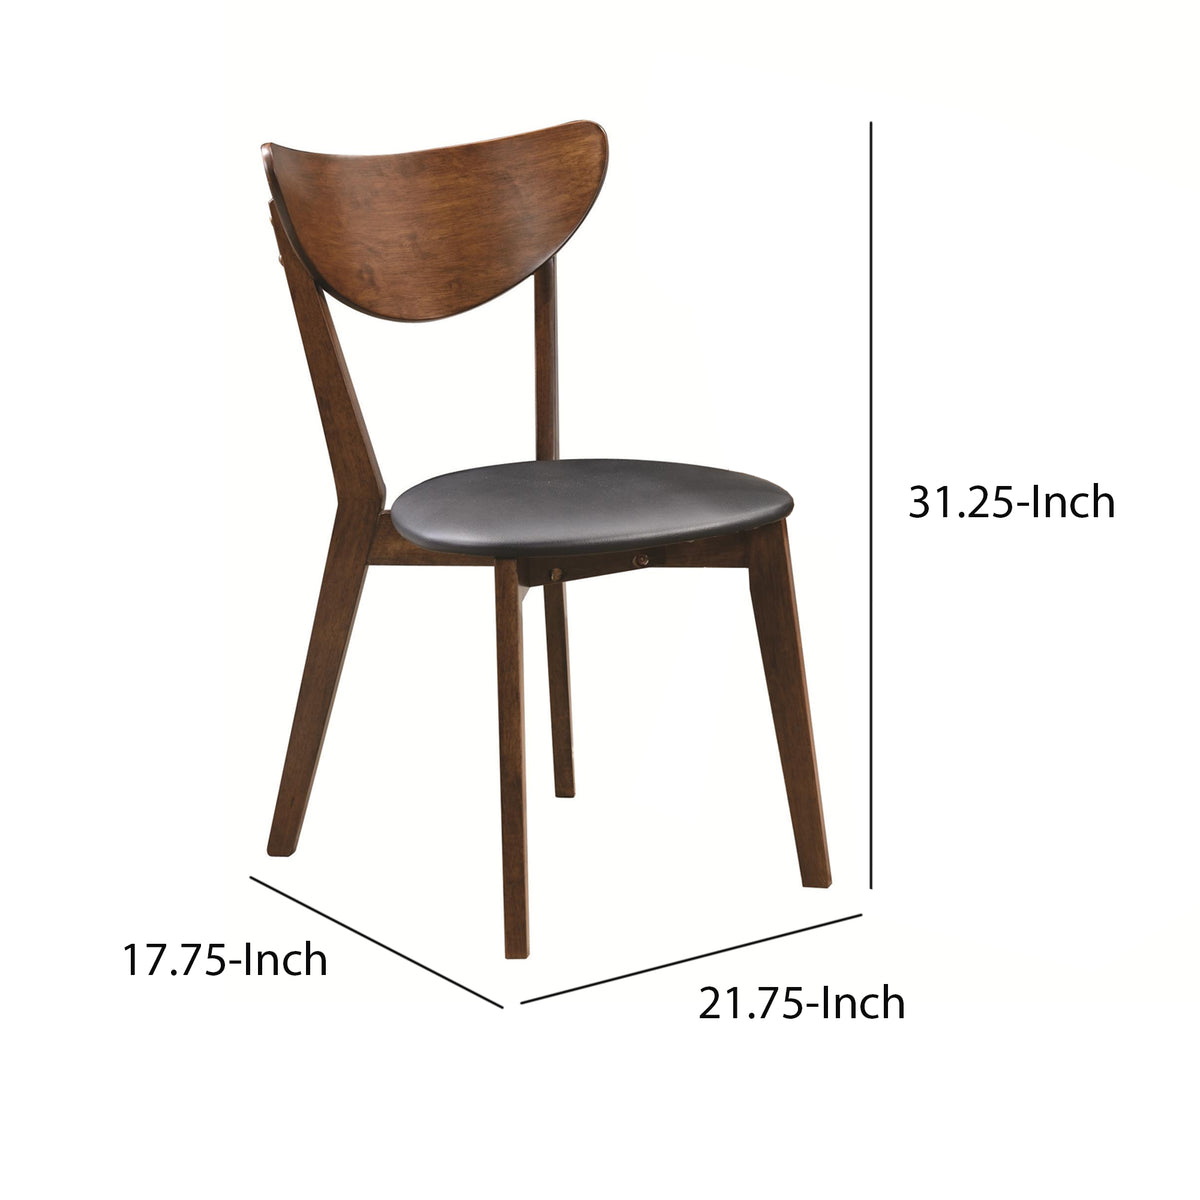 BM168072 Dining Side Chair with curved Back, Brown & Black, Set of 2